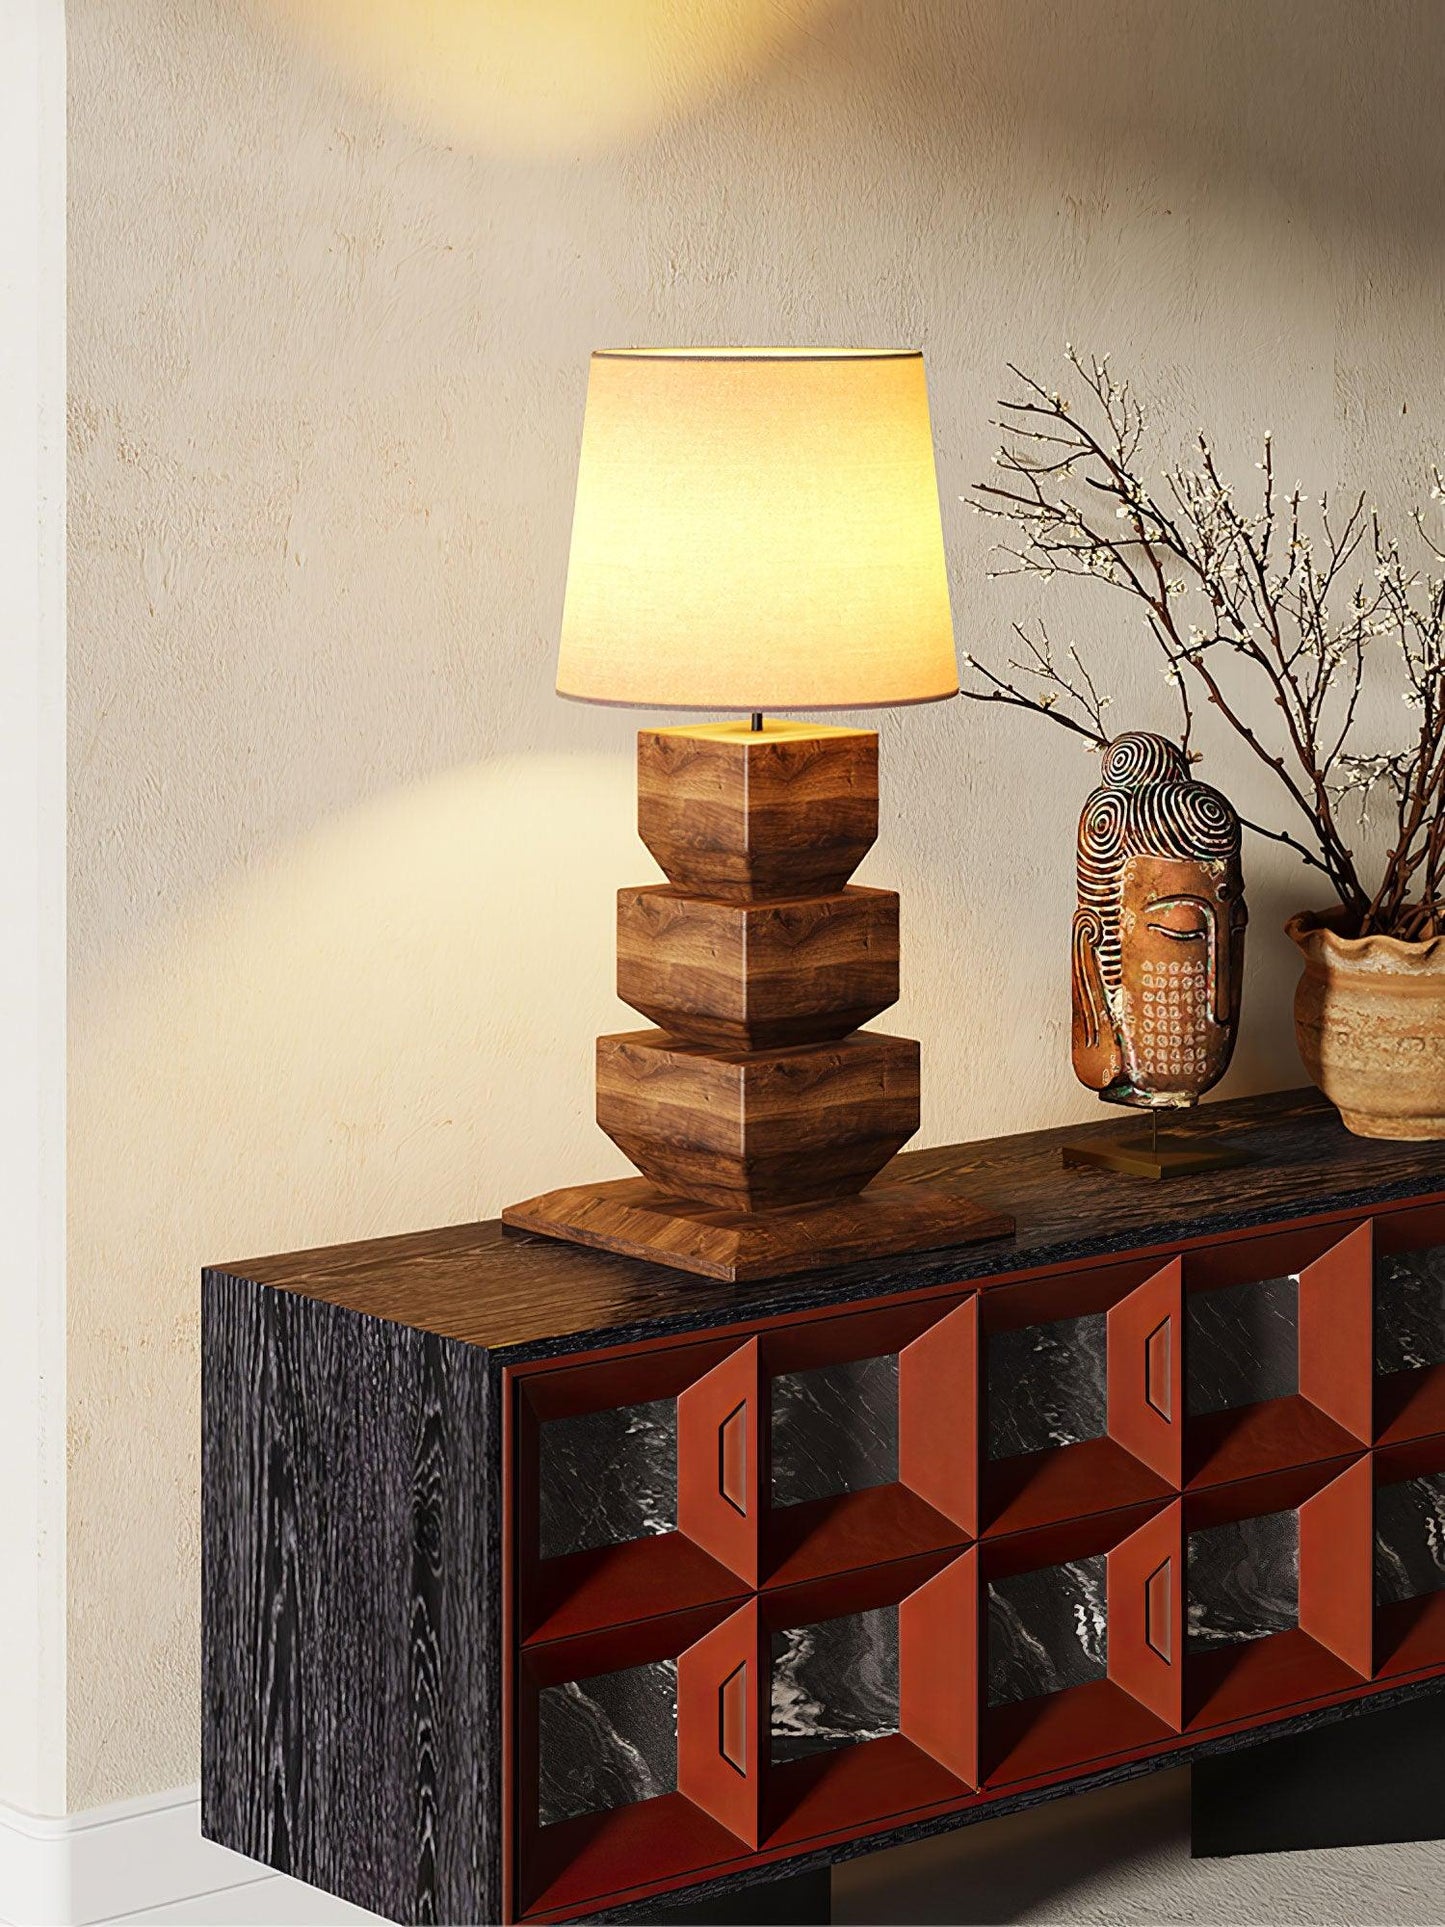 Stacked Wooden Table Lamp